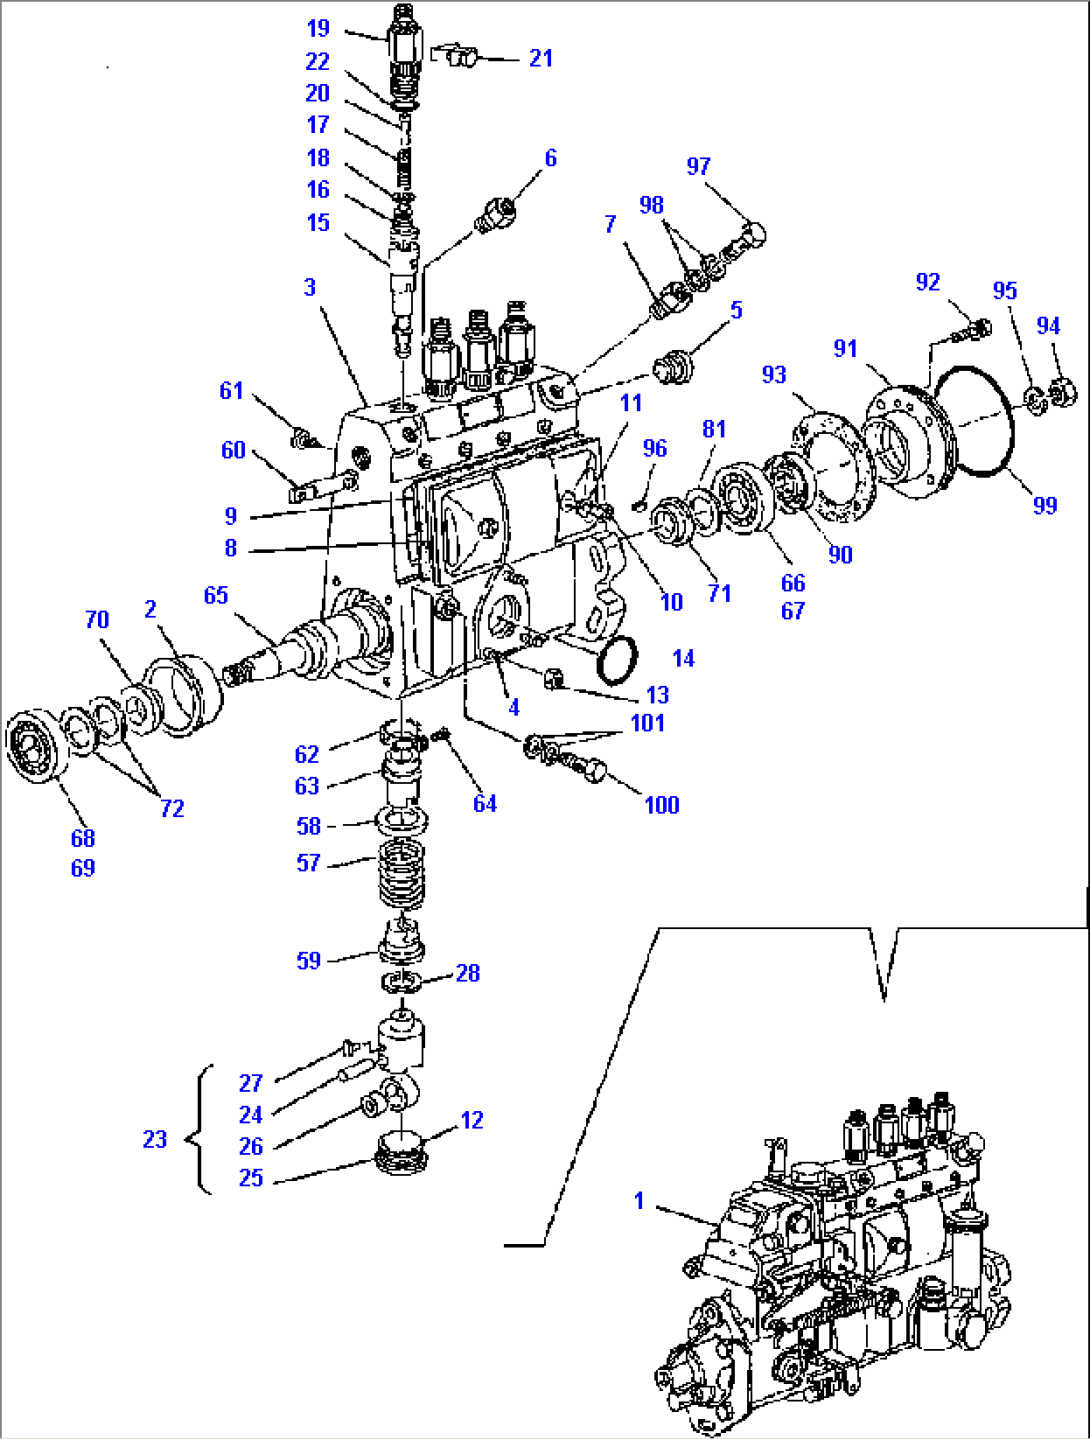 FIG. A0431-01A0 FUEL INJECTION PUMP